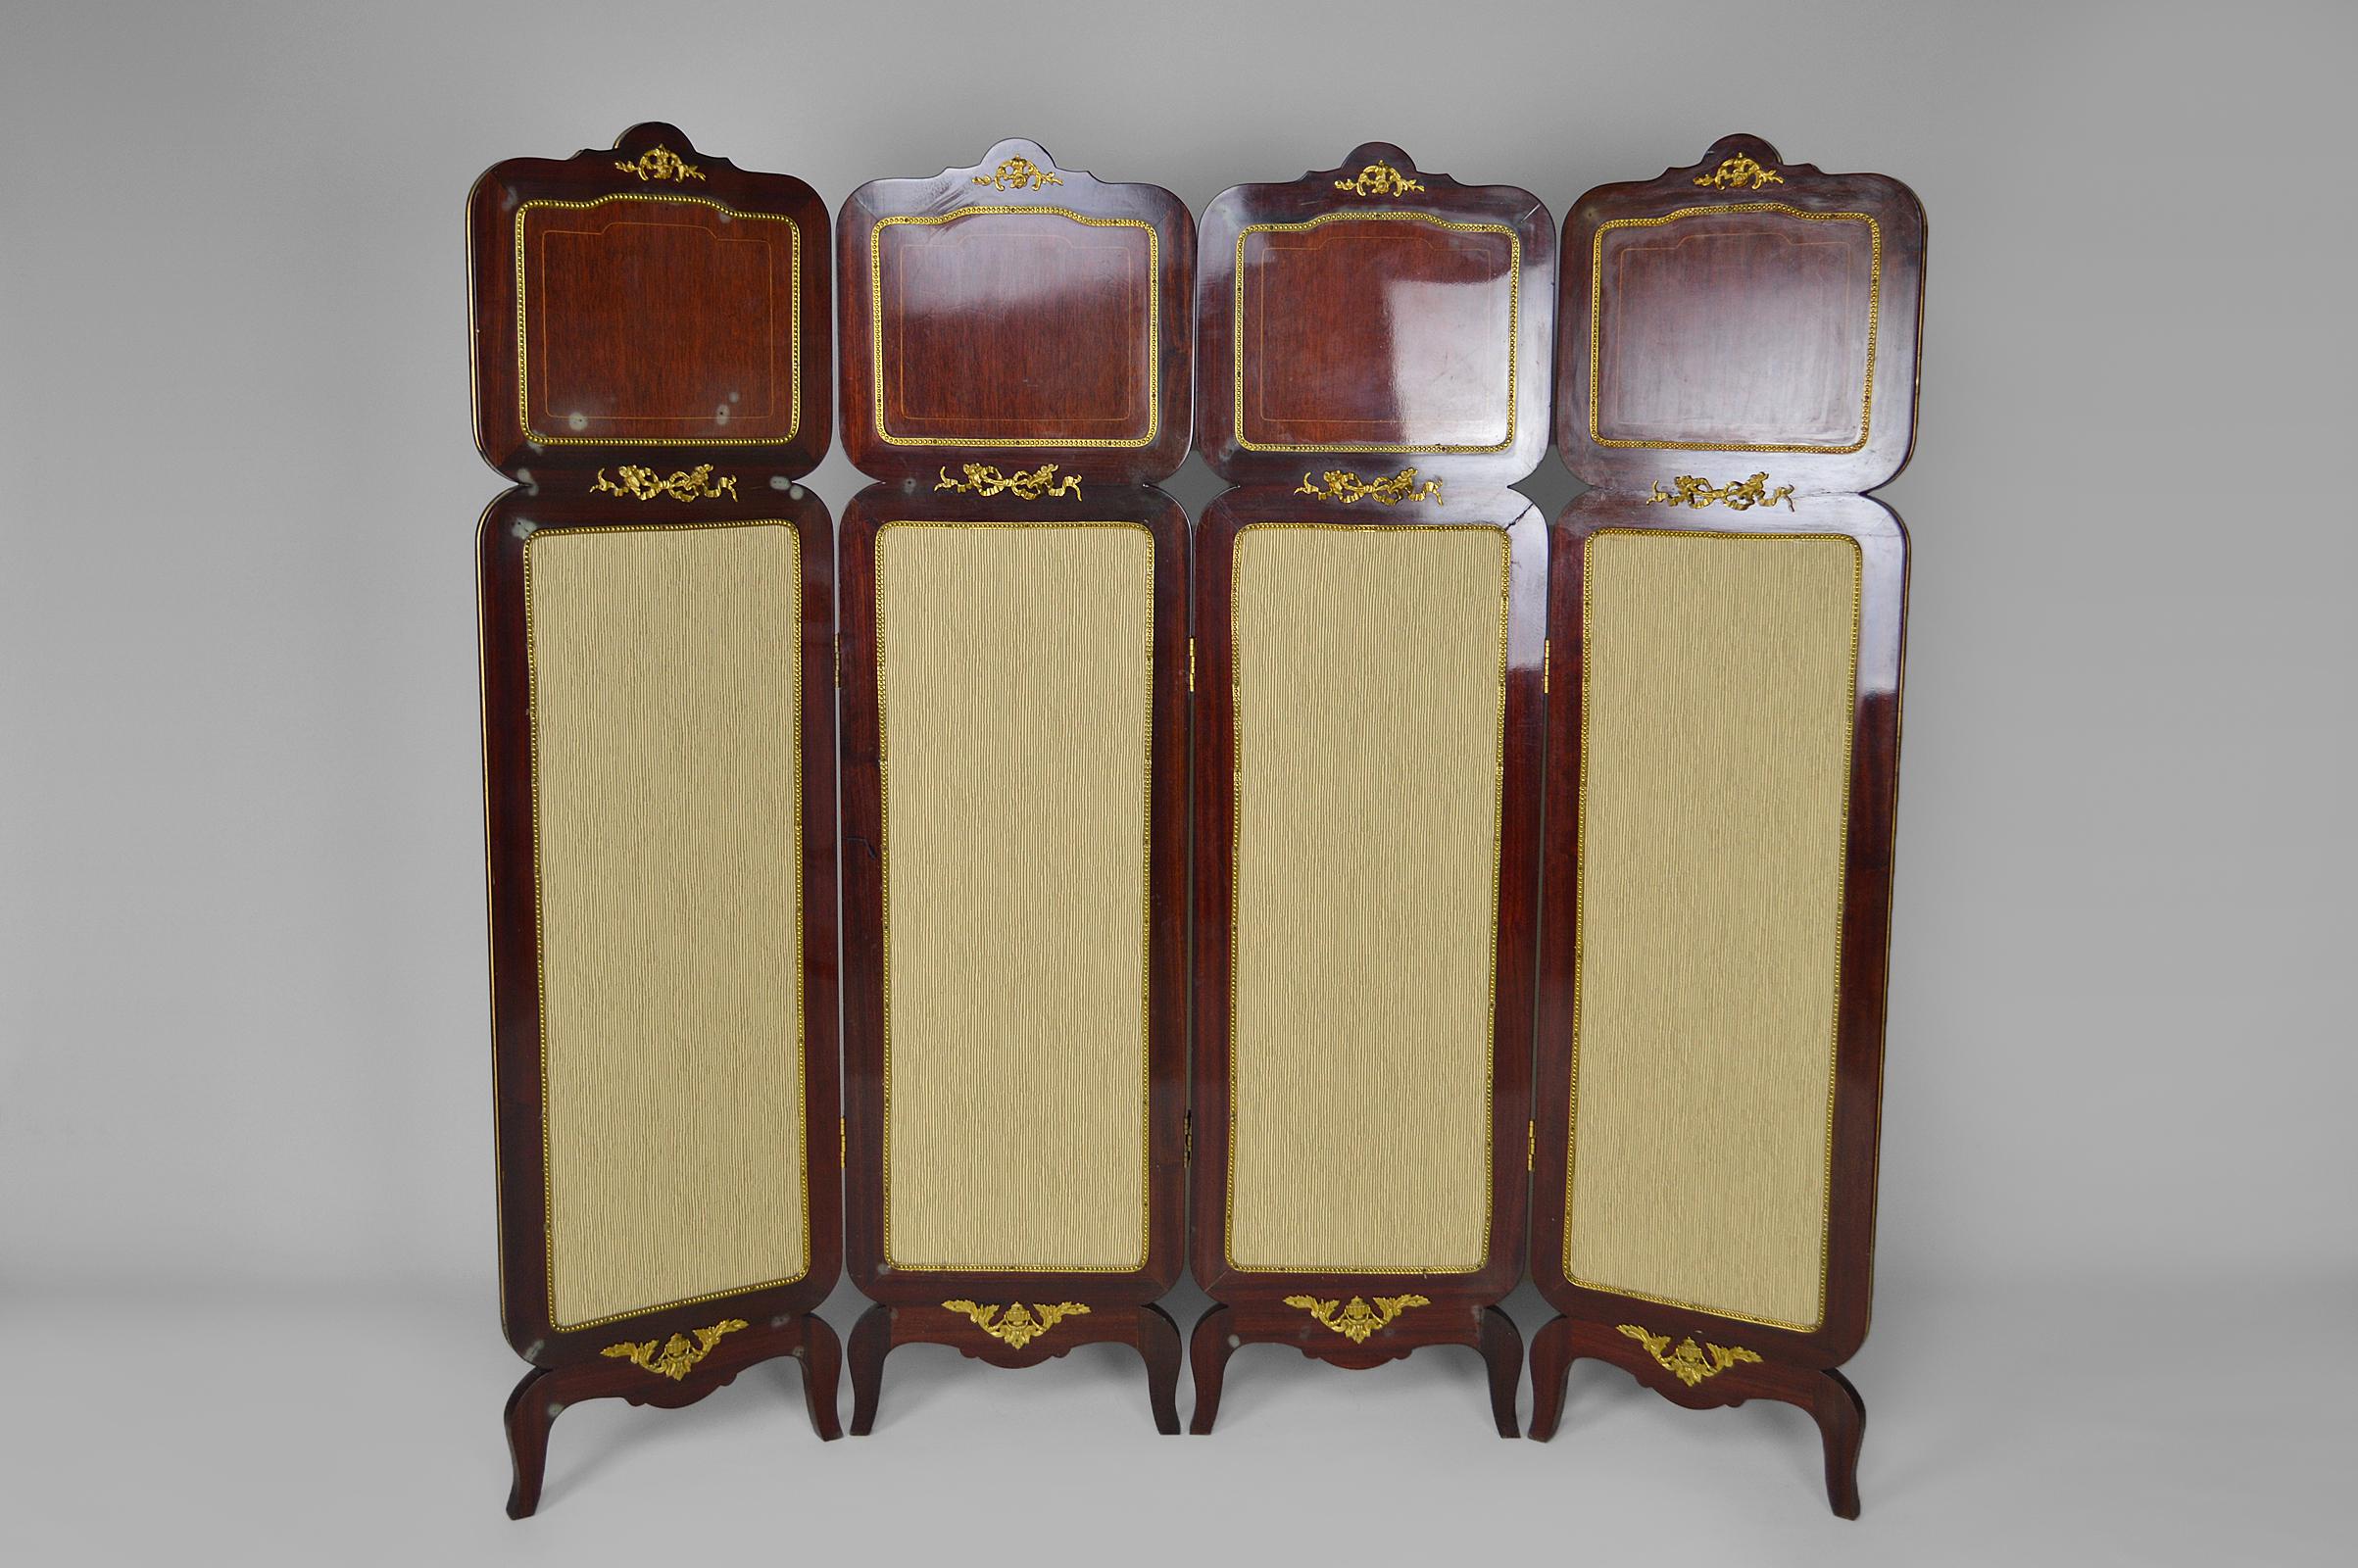 Neoclassical Revival Neo-Classical Folding Screen with Marquetry, France, circa 1970 For Sale